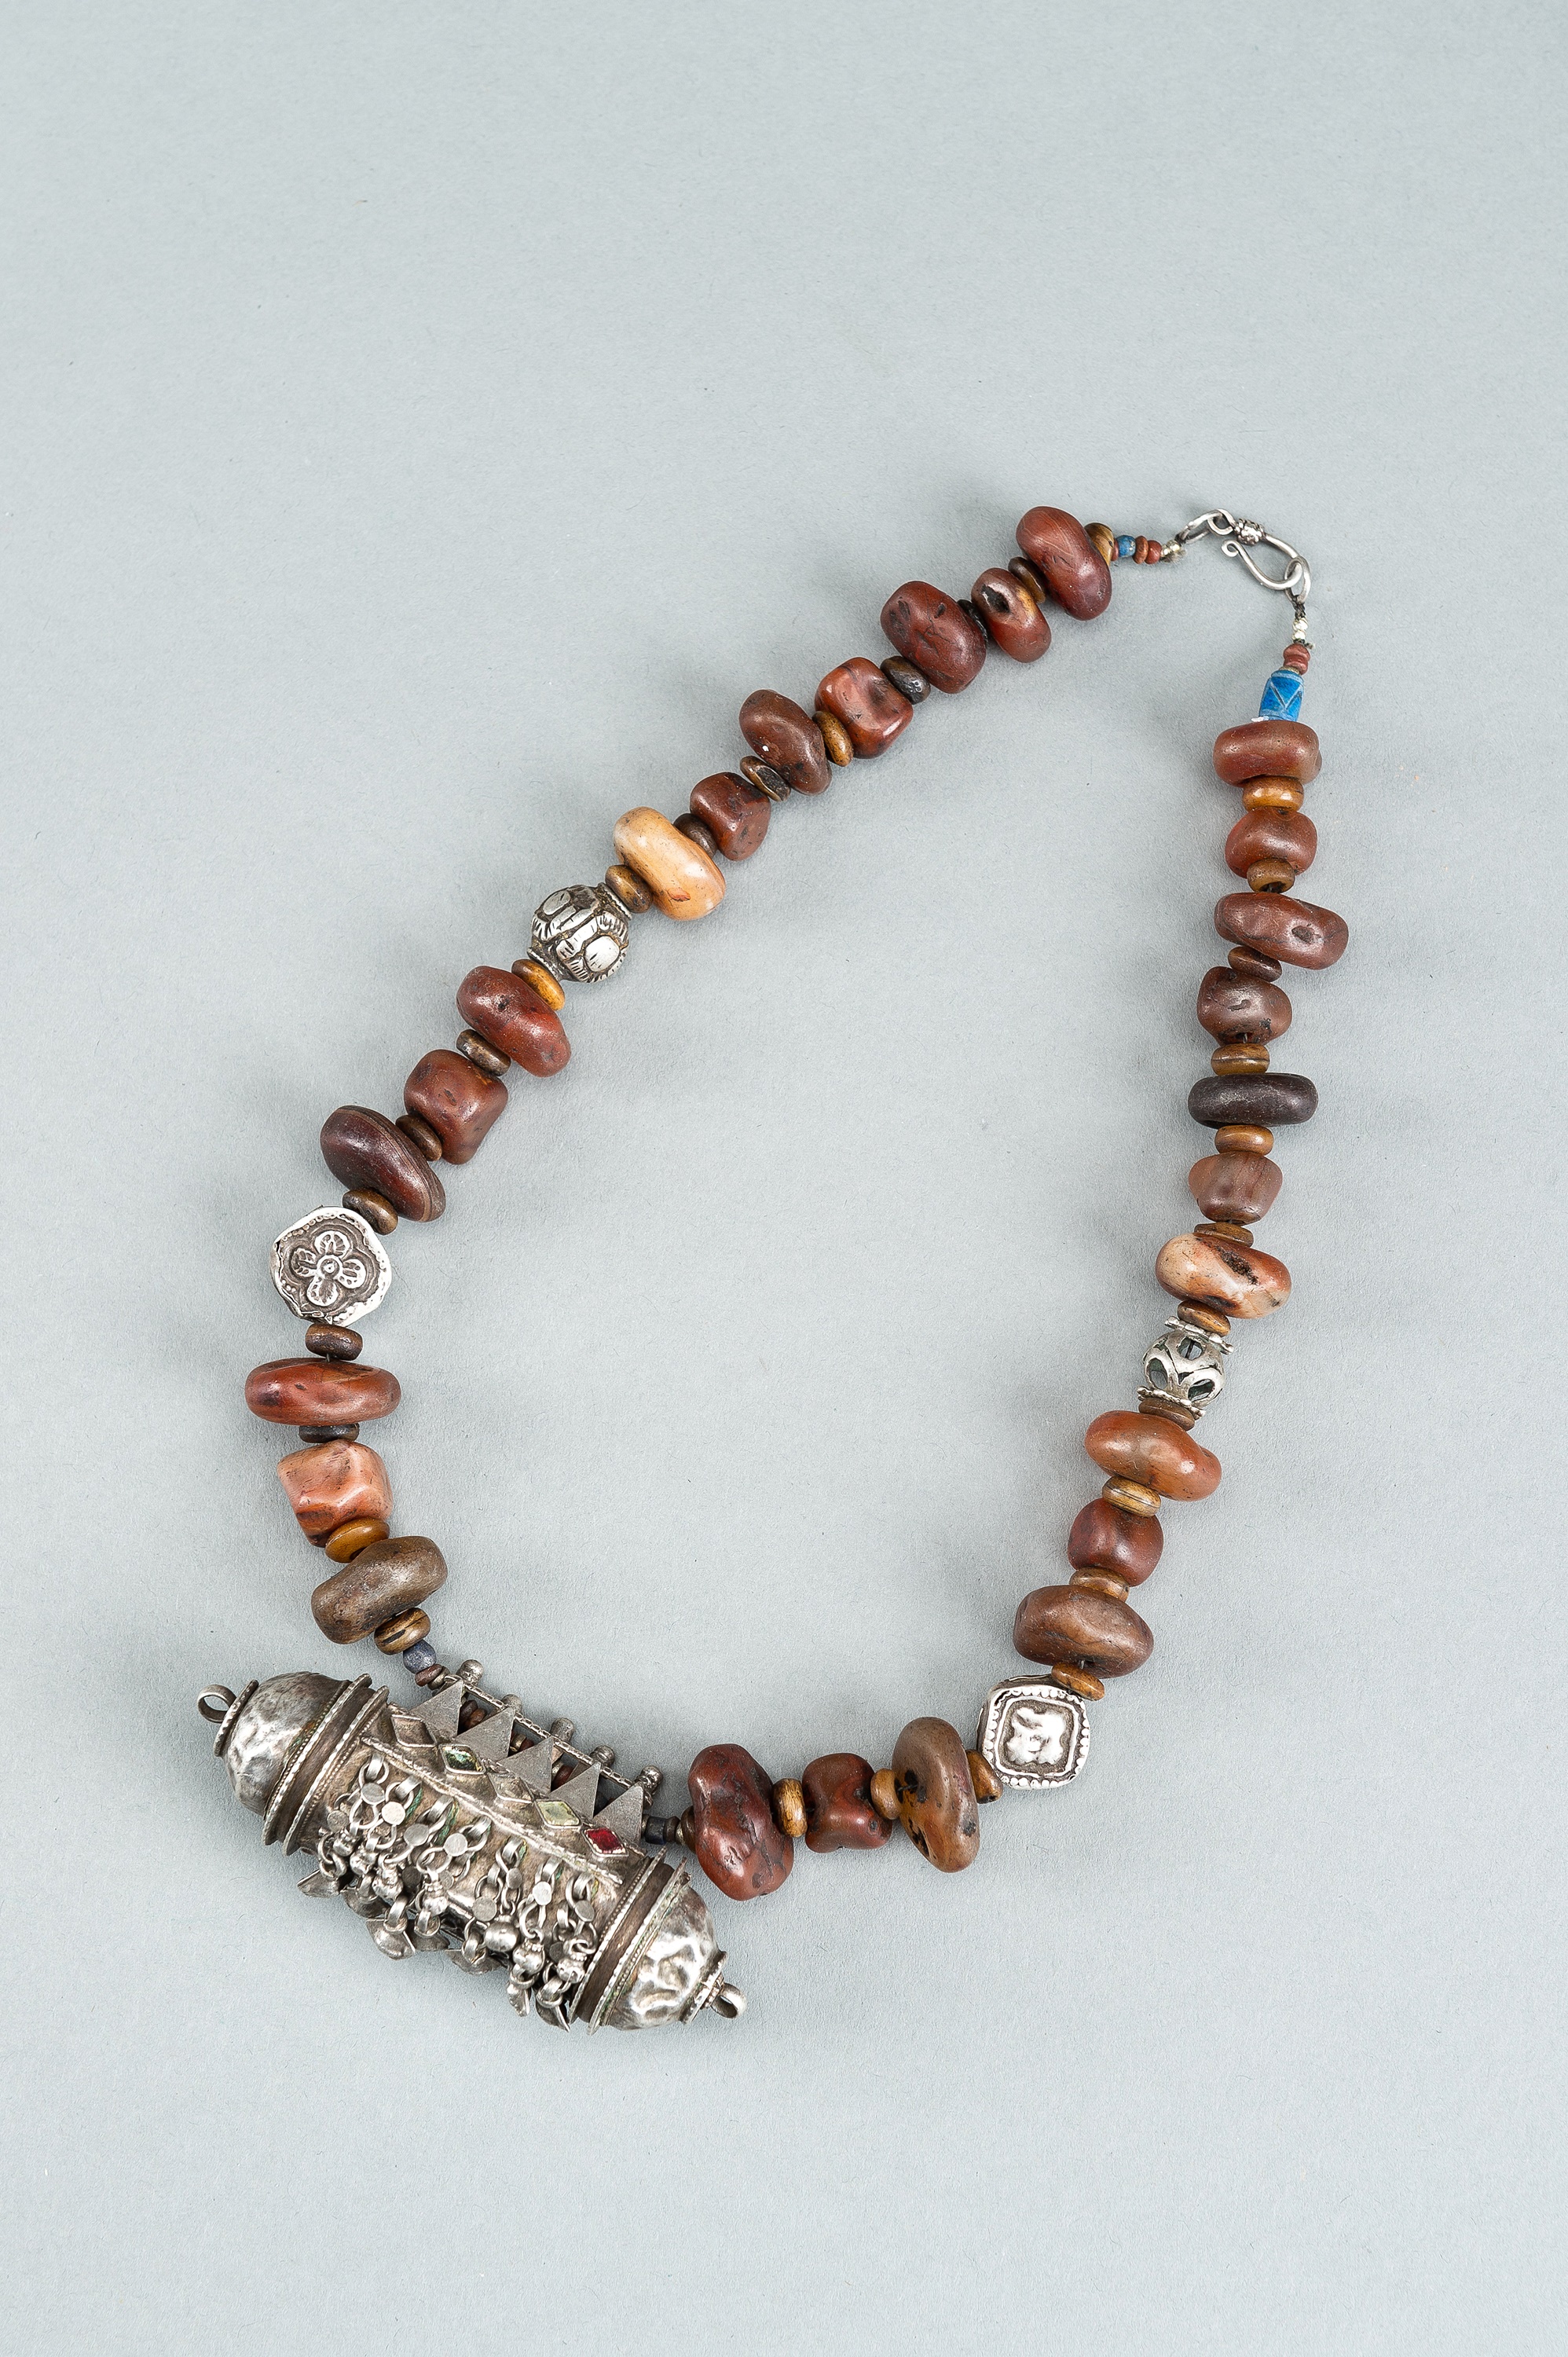 A SILVER AND GLASS AMULET PENDANT NECKLACE, c. 1900s - Image 2 of 13